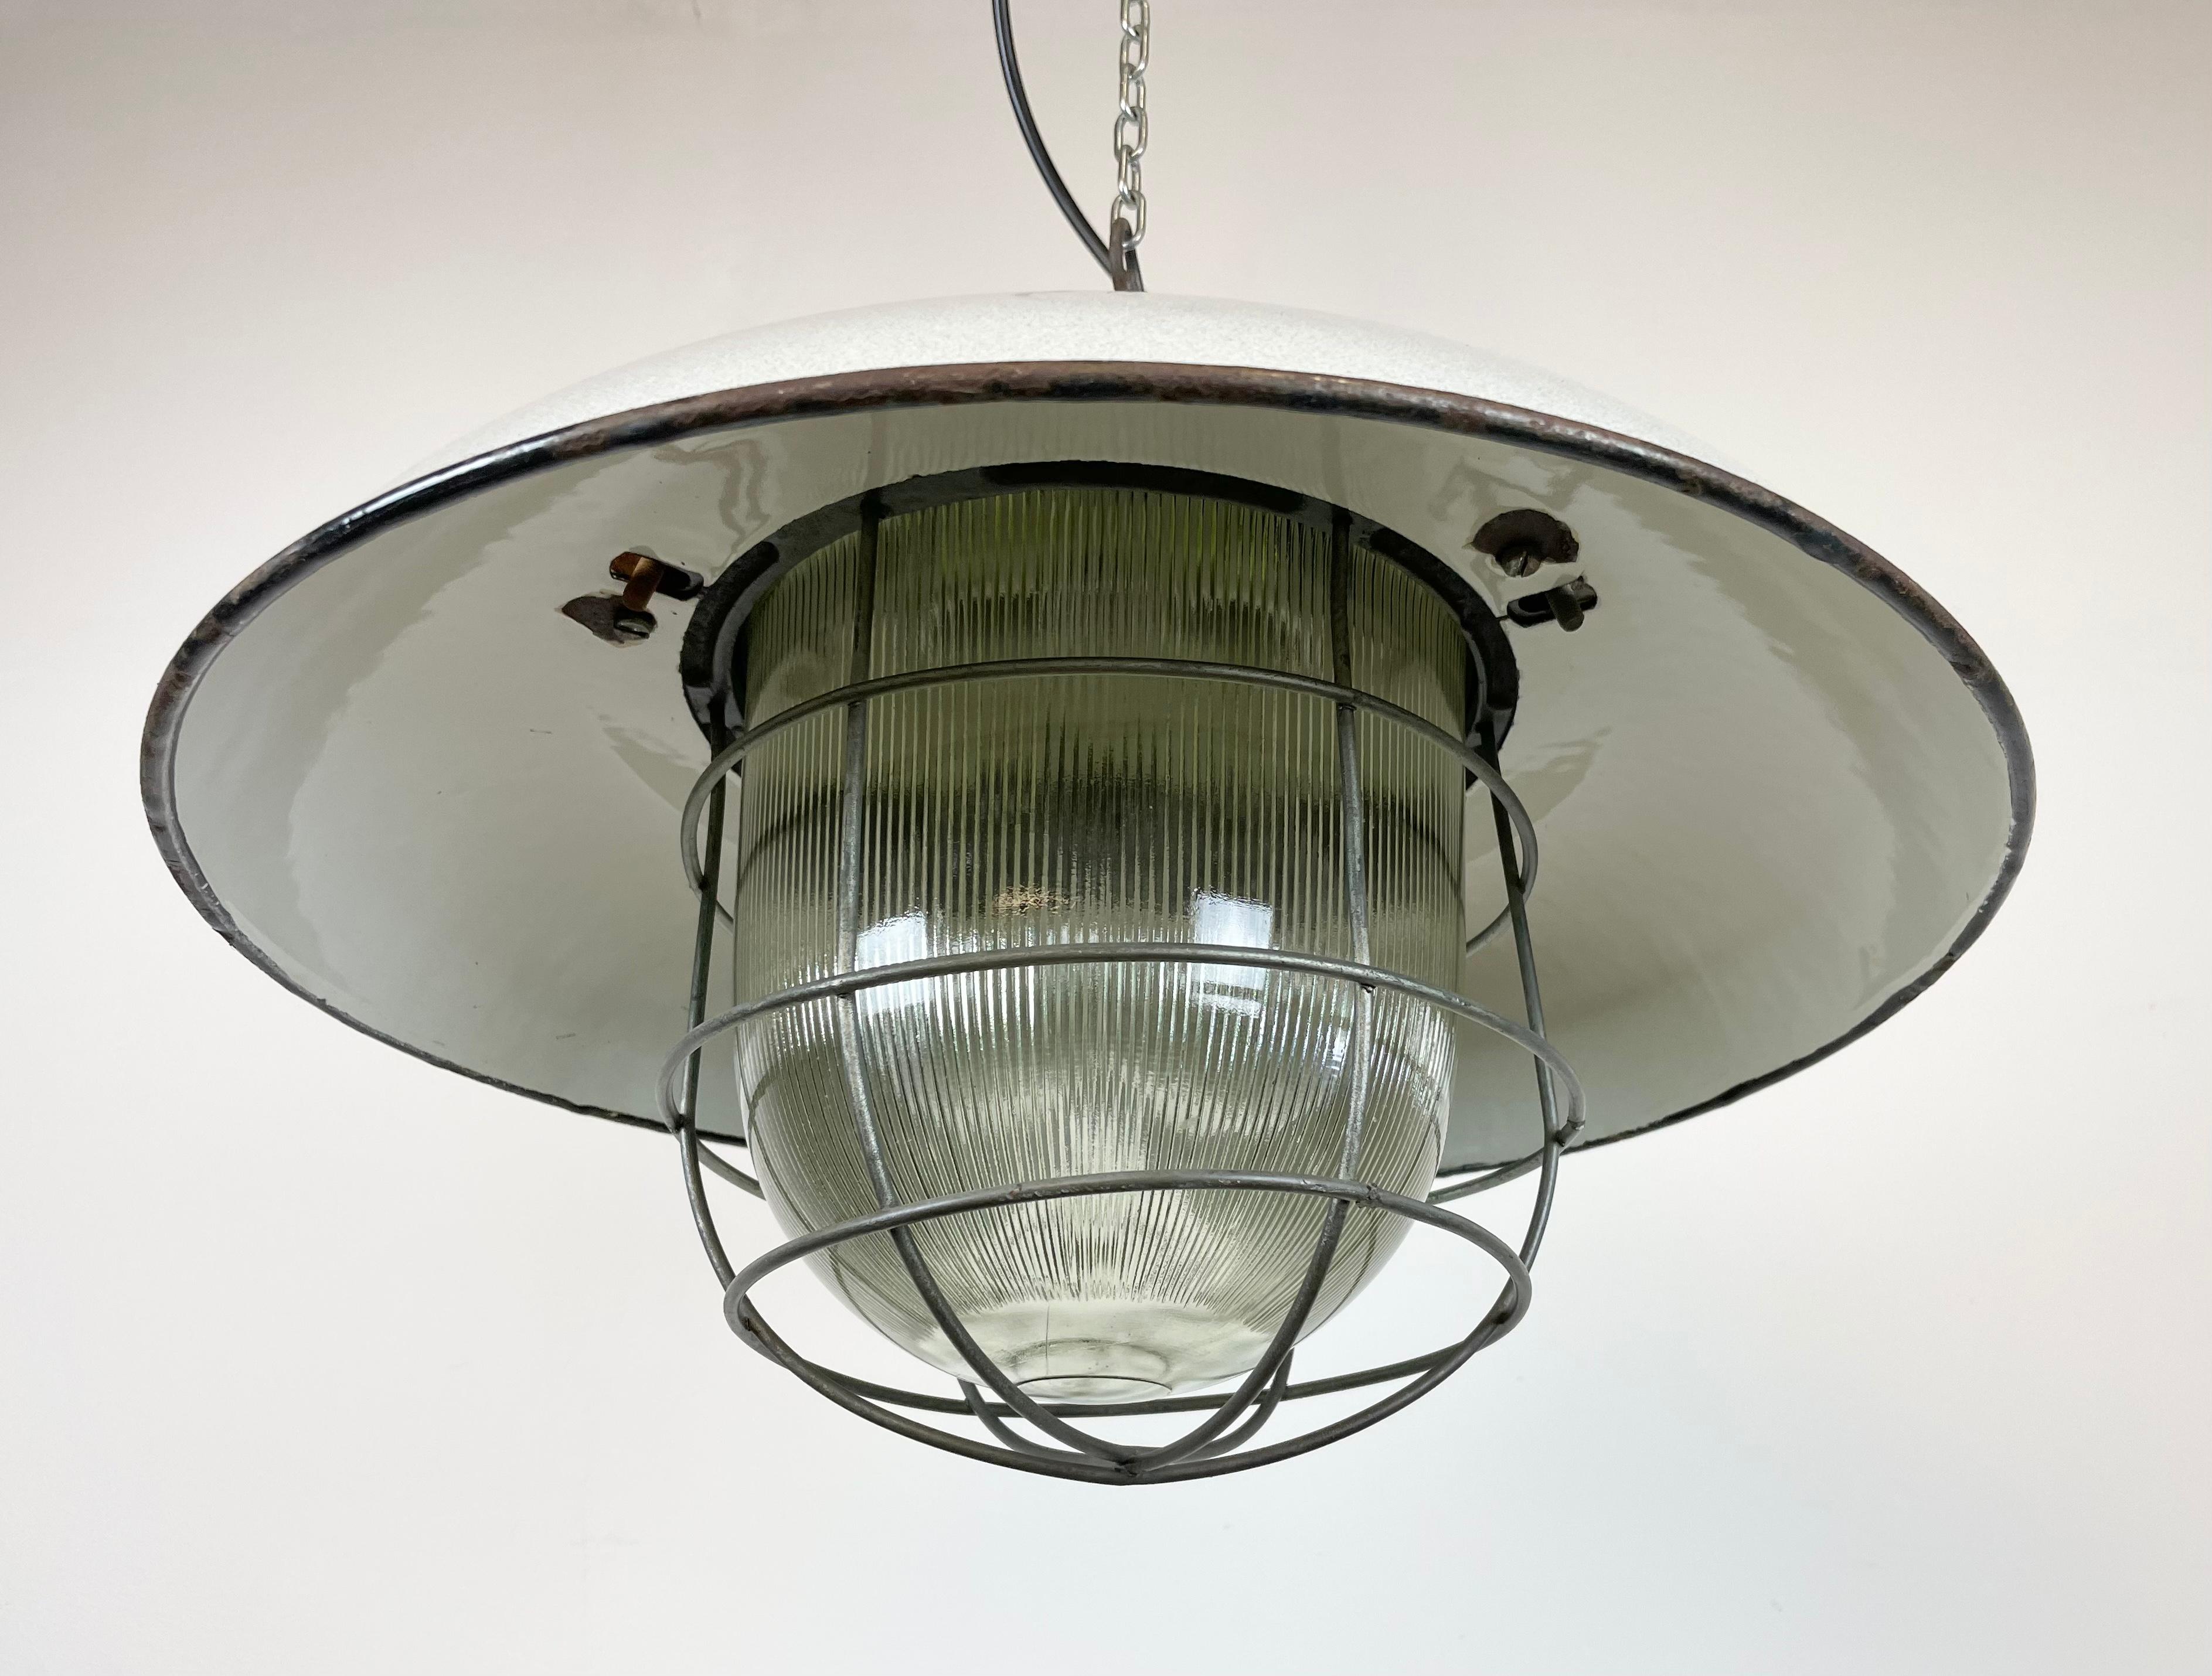 Industrial Grey Enamel Factory Cage Pendant Lamp in Cast Iron from Zaos, 1960s For Sale 3